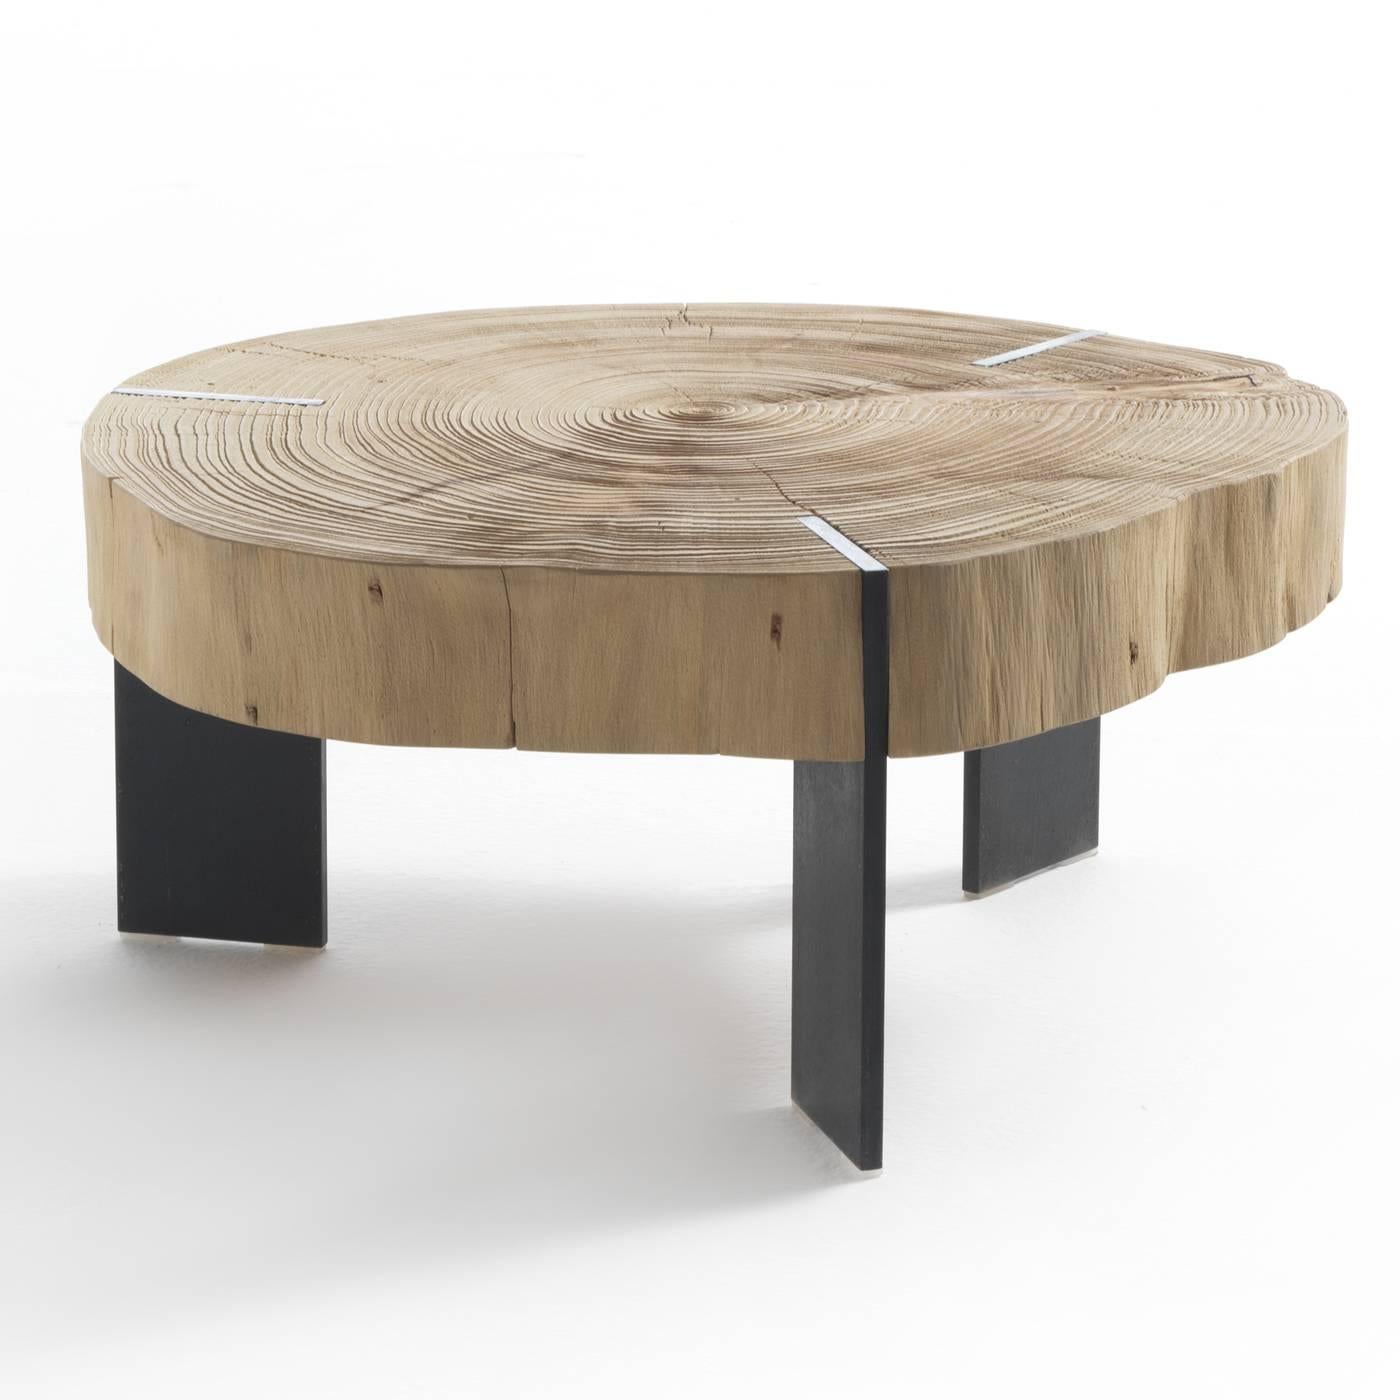 This exquisite coffee table is made of sections of a whole sandblasted cedar wood log resting on waxed iron legs. Here, nature is the real protagonist in all its majesty.